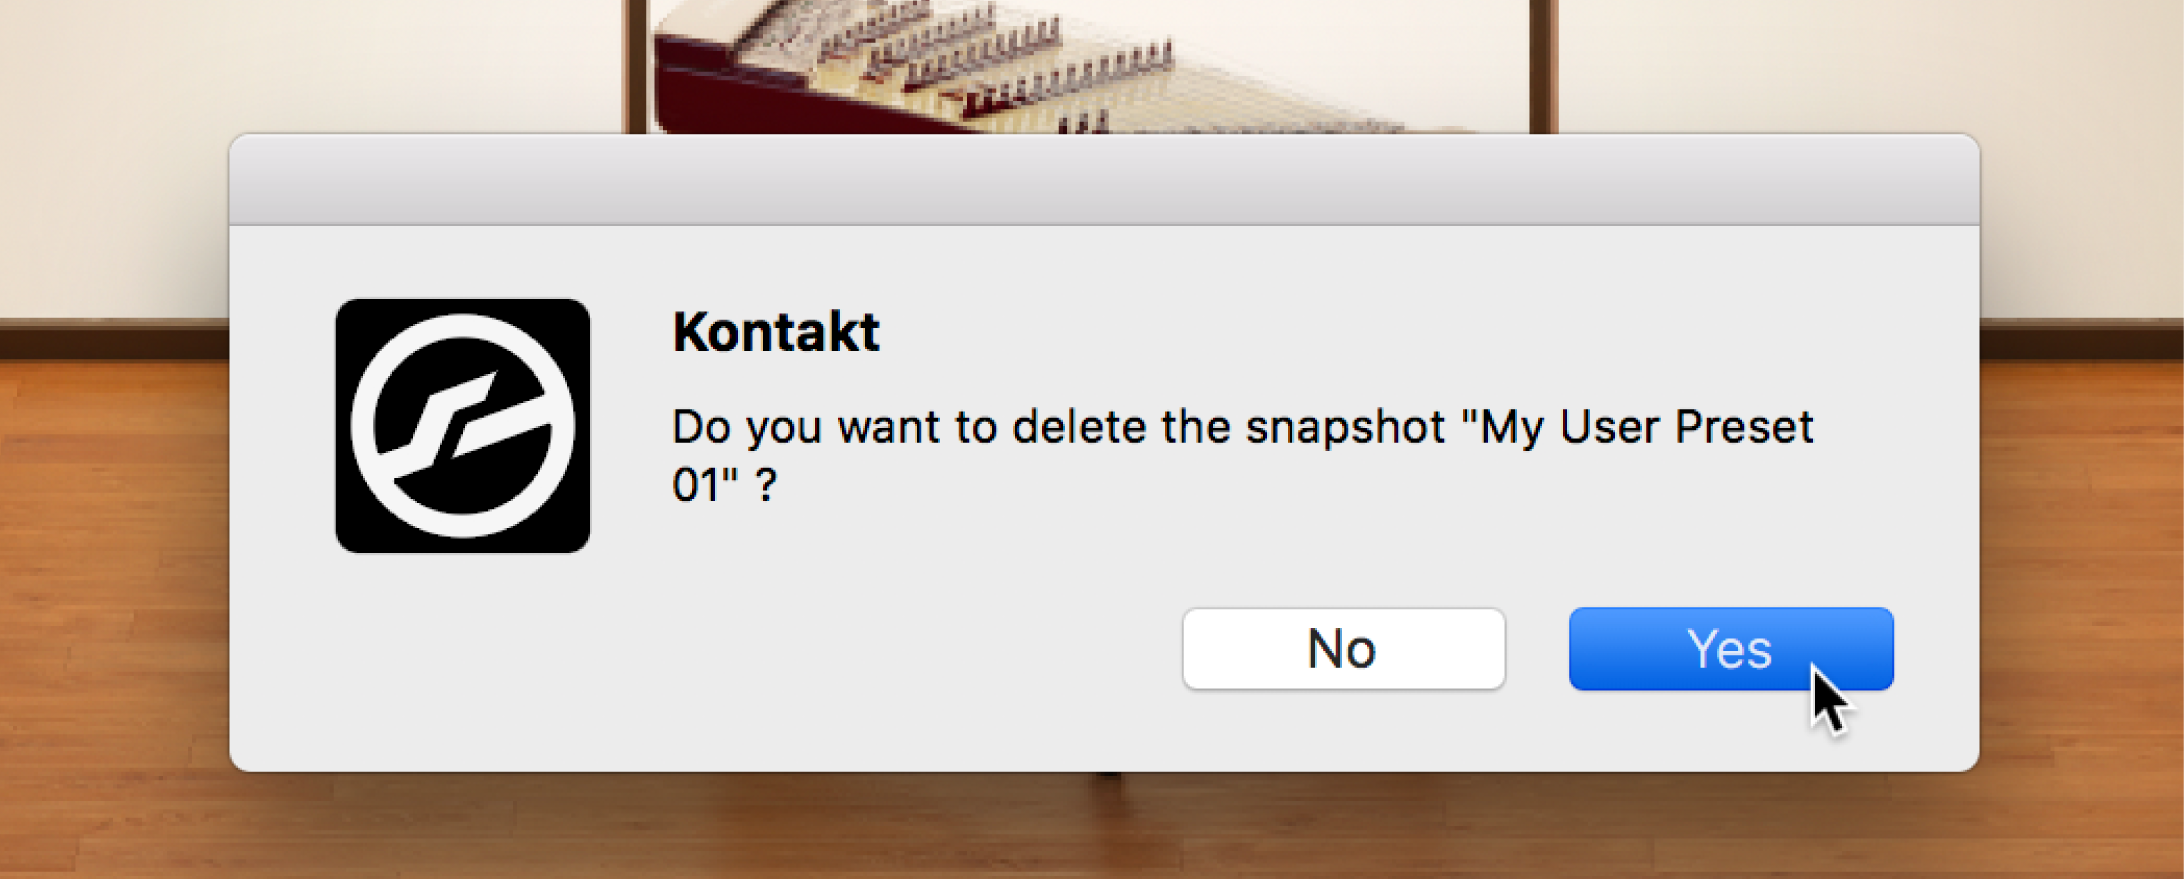 A dialog to confirm deleting a user snapshot.